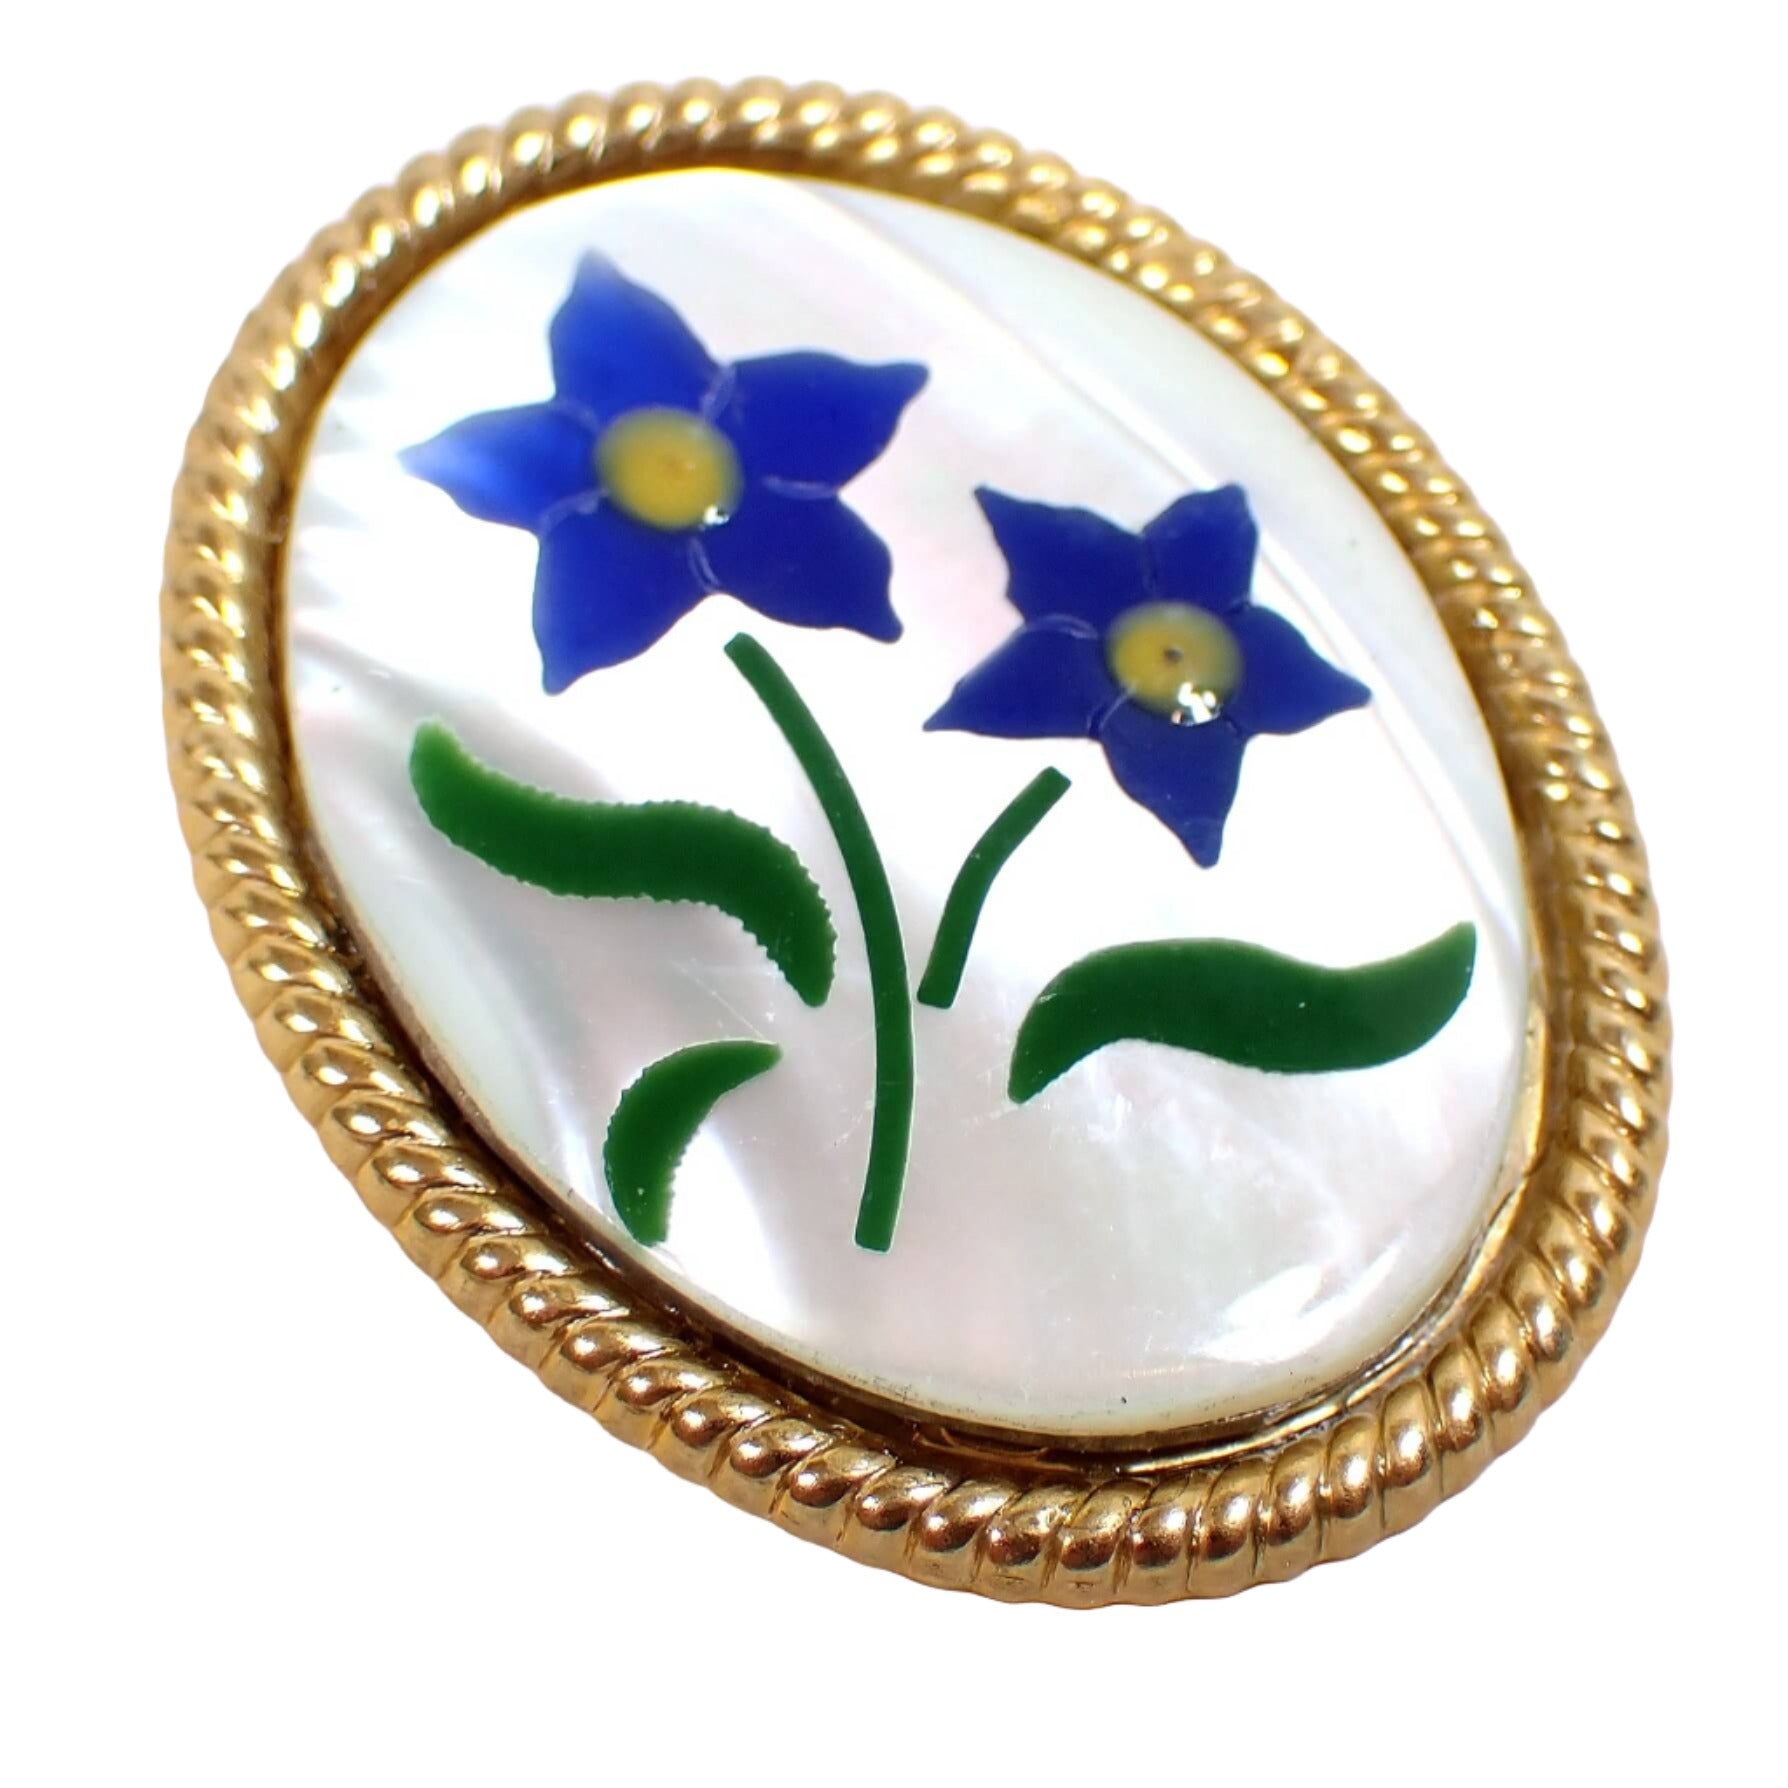 Angled front view of the retro vintage floral brooch pin. It is a large oval shape with gold tone plated metal edge. There is a pearly white mother of pearl cab on the front. There are pieces of dyed shell inlaid in the mother of pearl cab to form two blue flowers with yellow centers and green leaves.